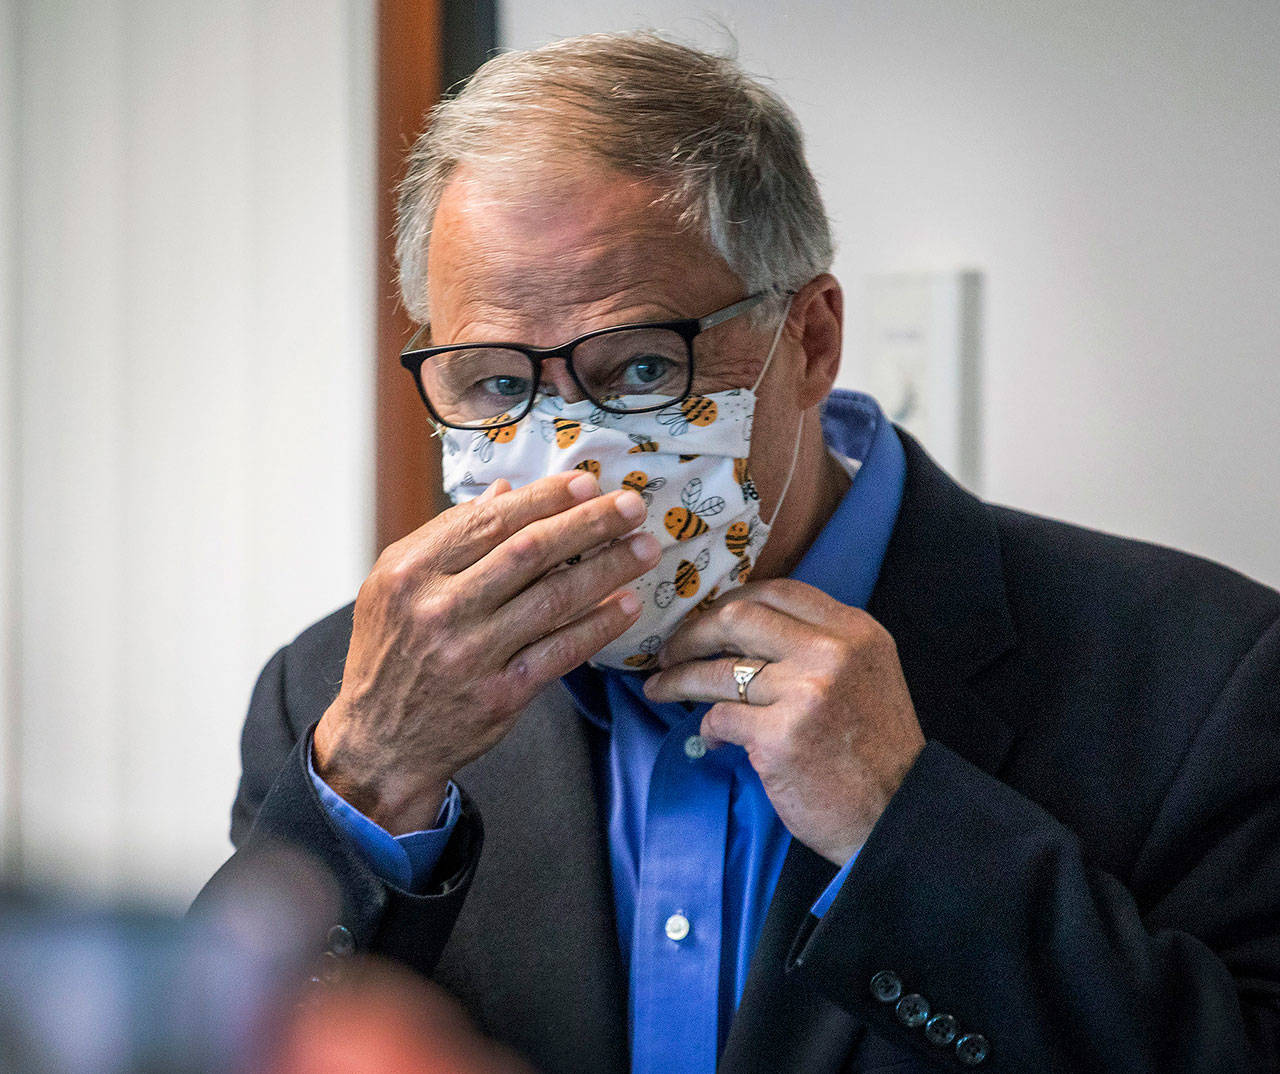 Washington Gov. Jay Inslee puts on his face mask after speaking to the media Wednesday, in Tumwater, about the state’s effort at contact tracing amid the coronavirus pandemic. (Steve Ringman/The Seattle Times via AP, Pool)